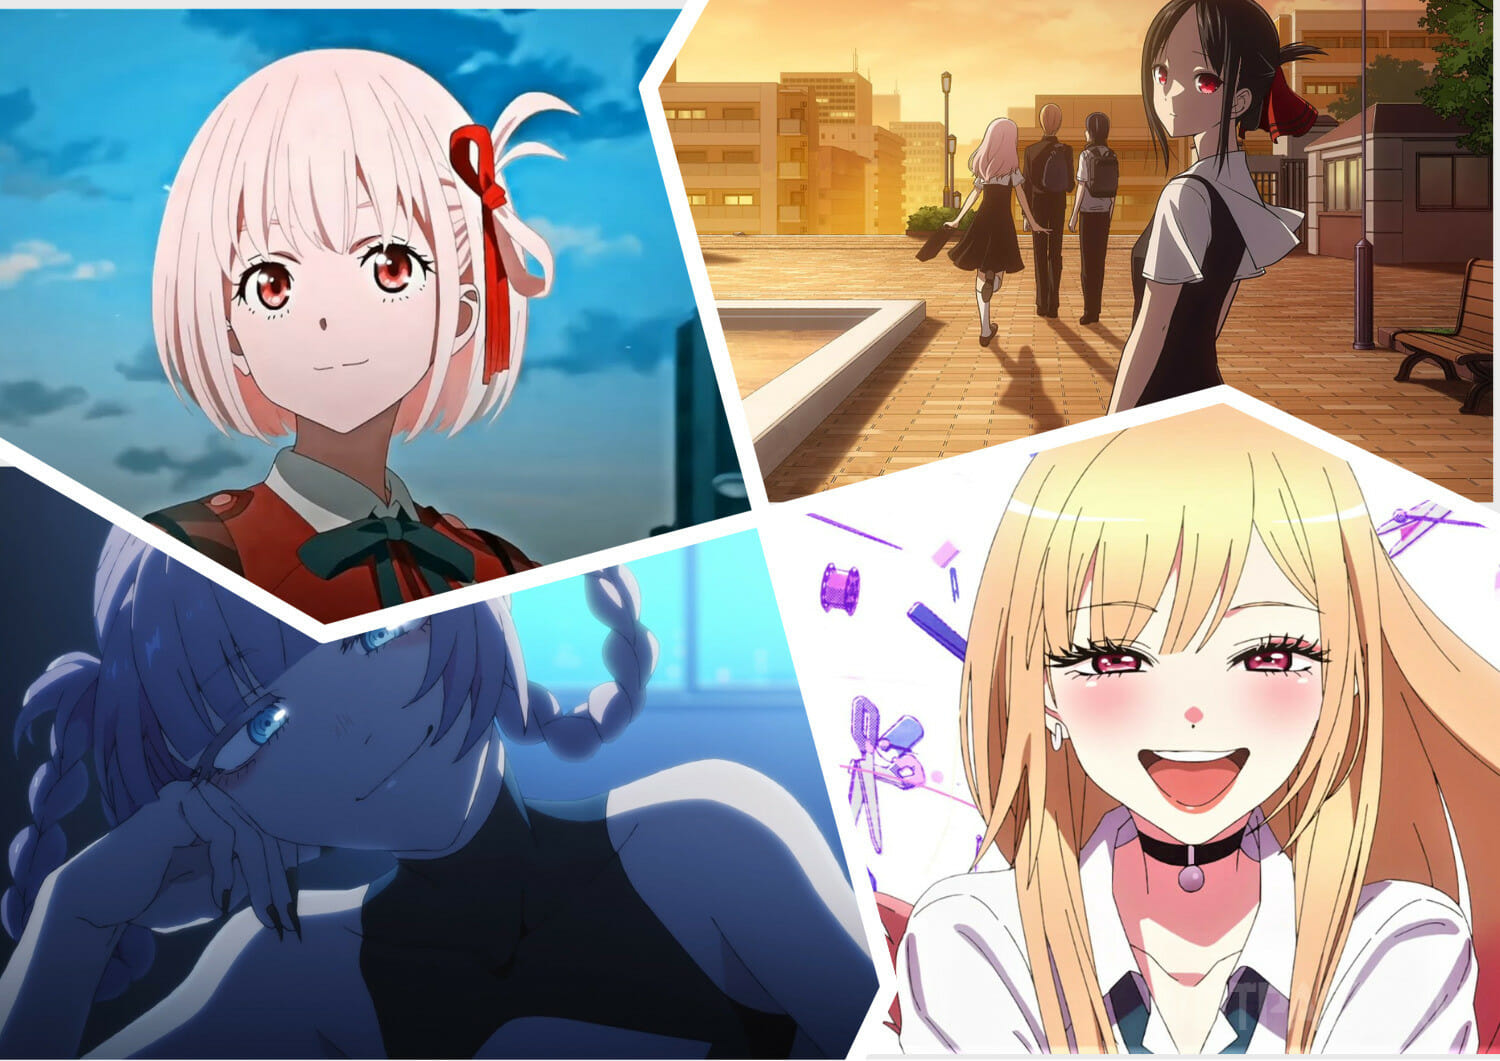 Top 8 Most Popular Anime Girl Ranking 20072019 by Amount of Fanart   YouTube